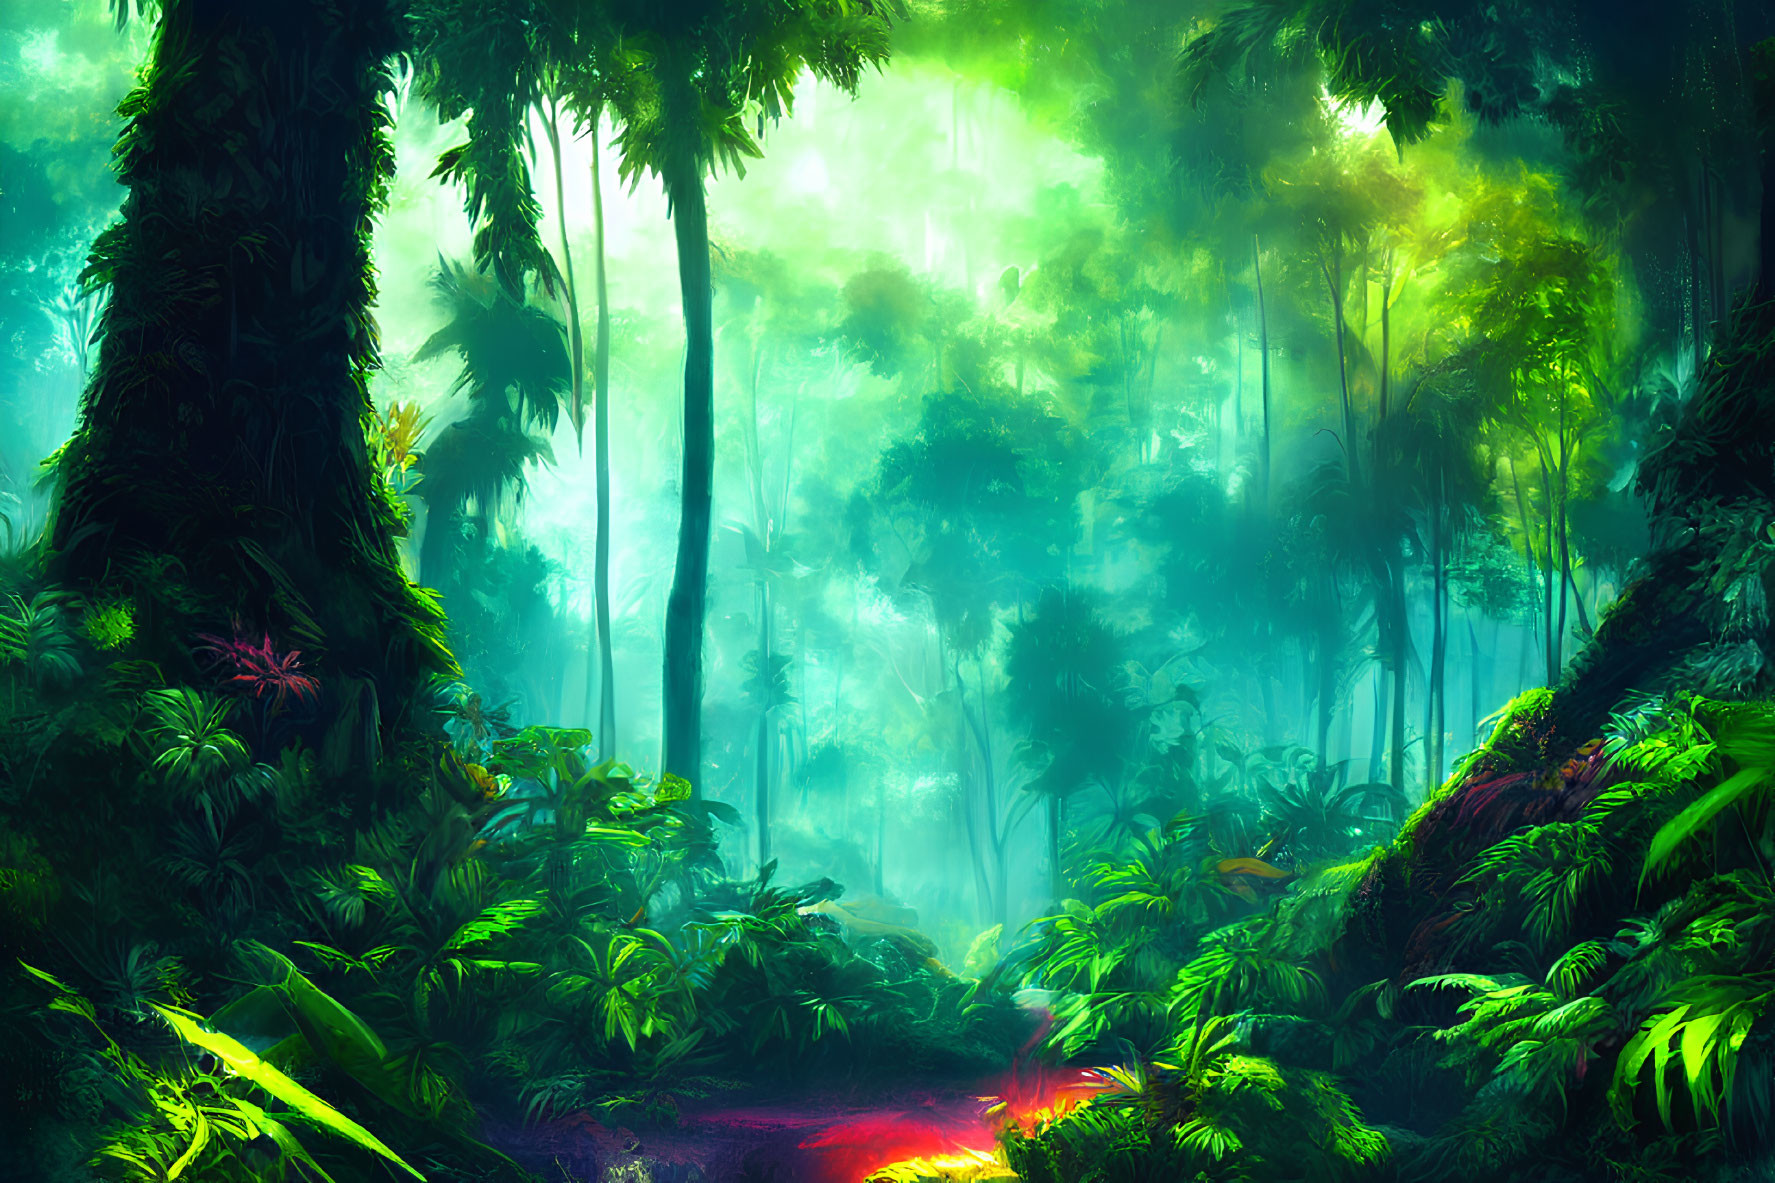 Lush green jungle with ethereal light and vivid plants